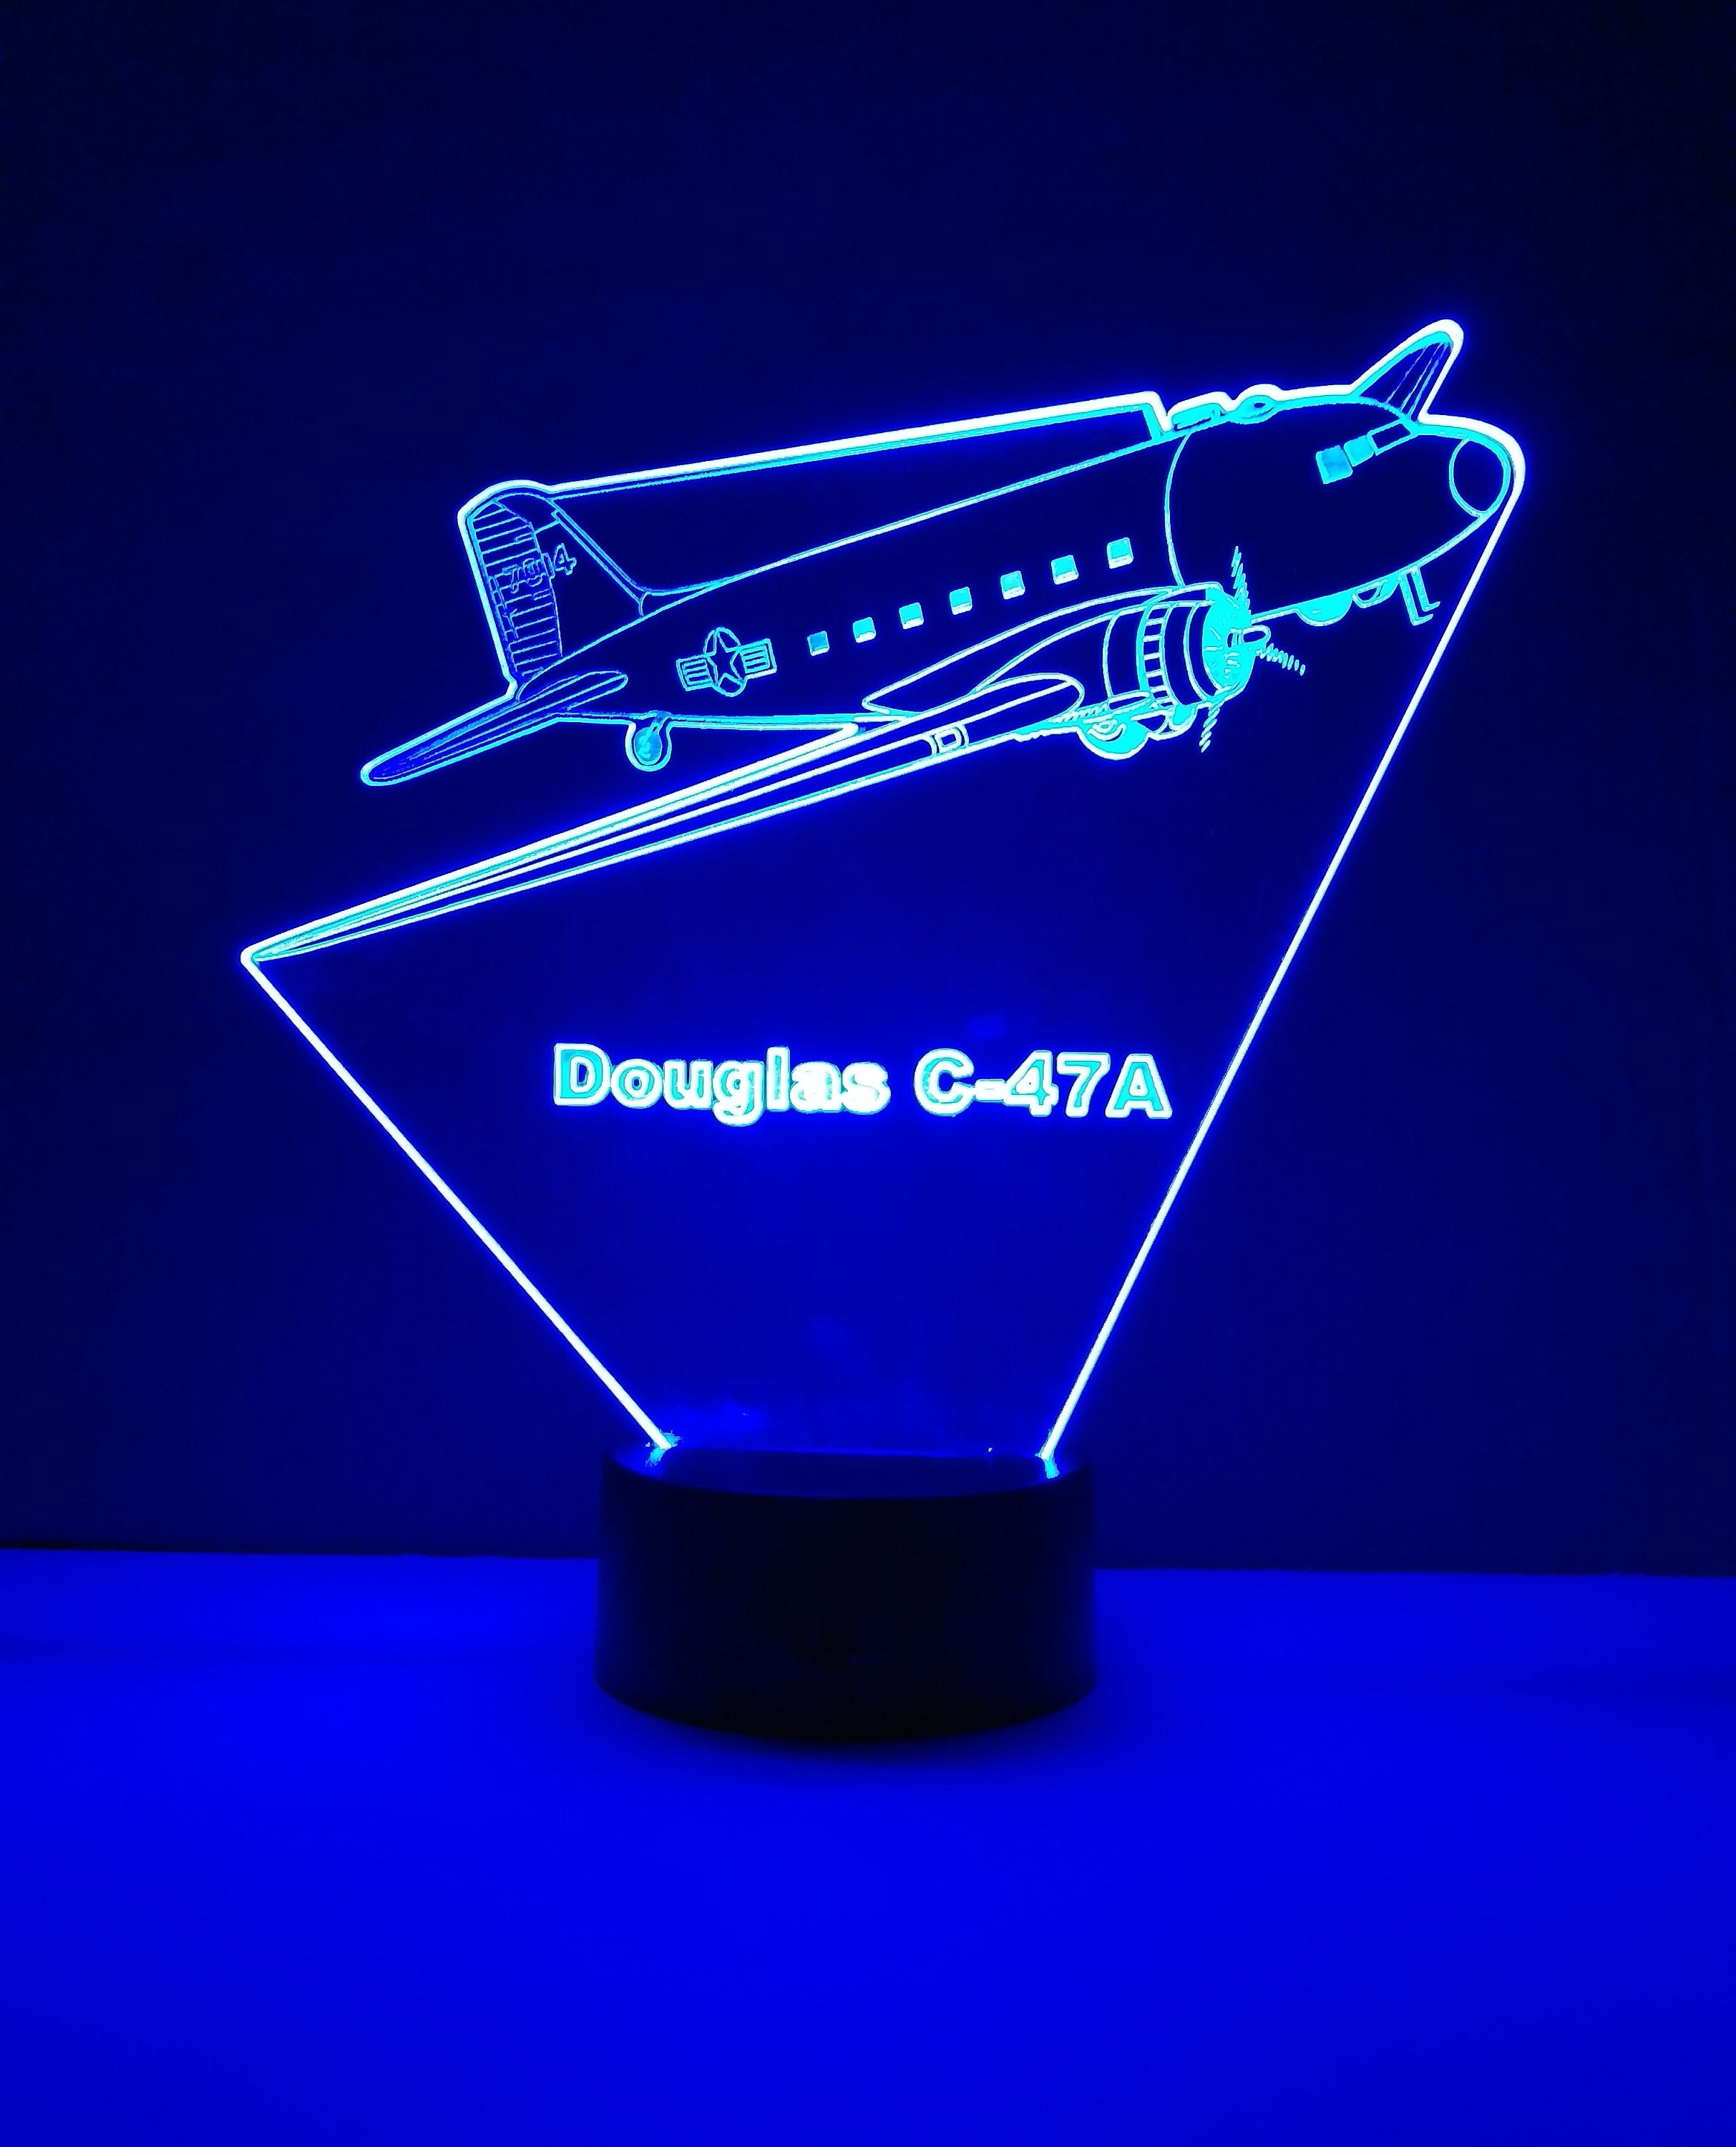 Awesome "Douglas C-47A" LED 3D lamp (1114) - FREE SHIPPING!